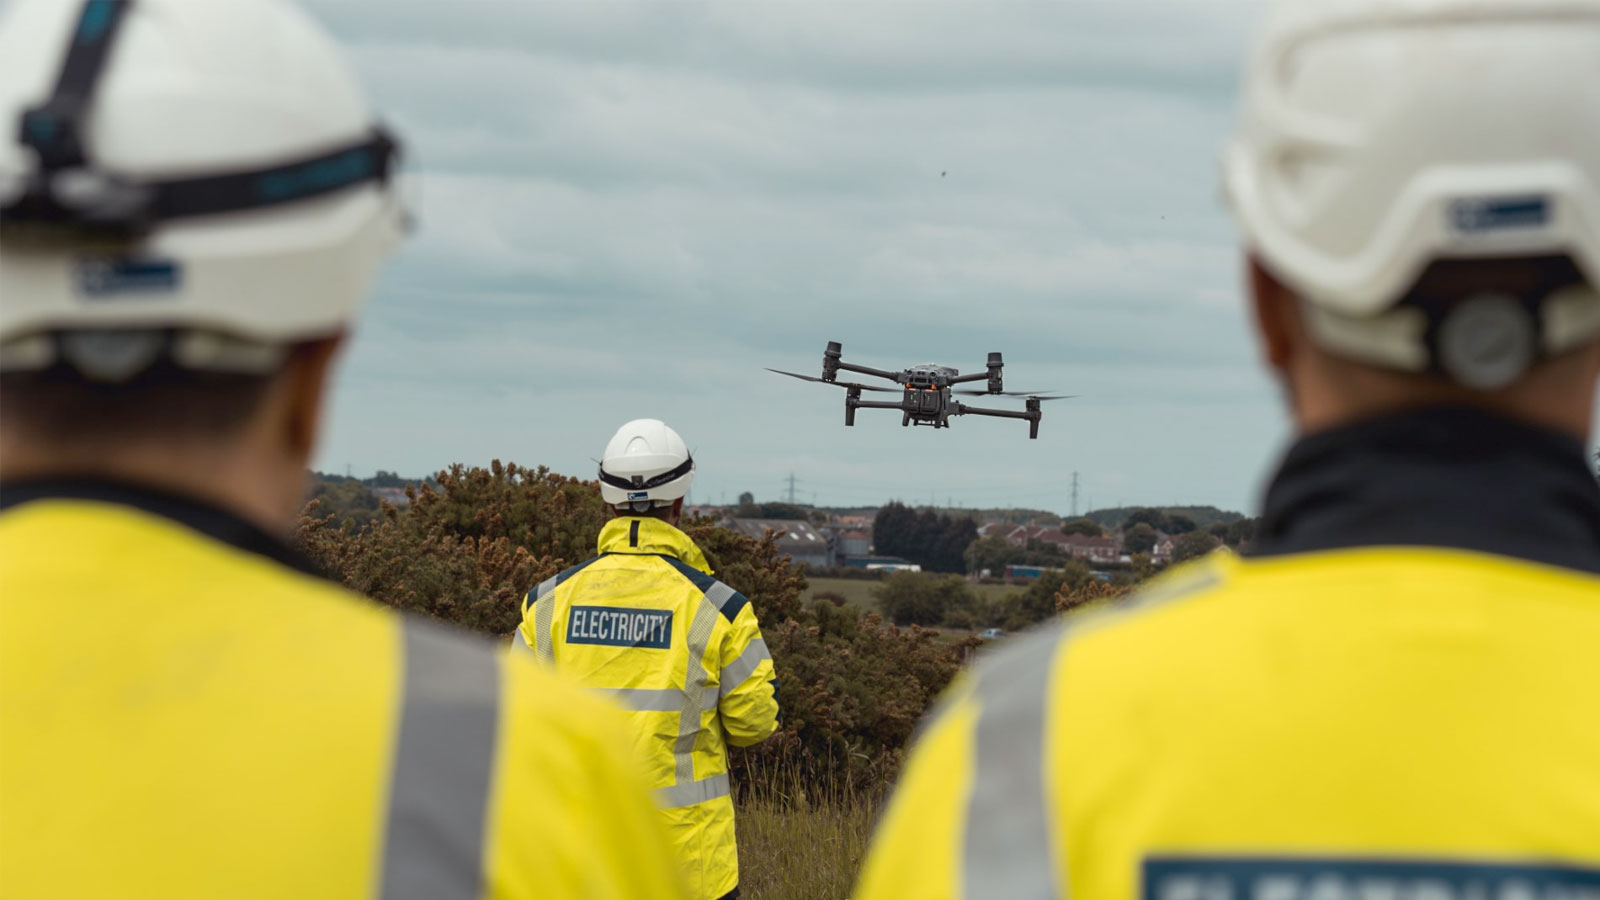 UK Power Networks leverages drones for power grid maintenance